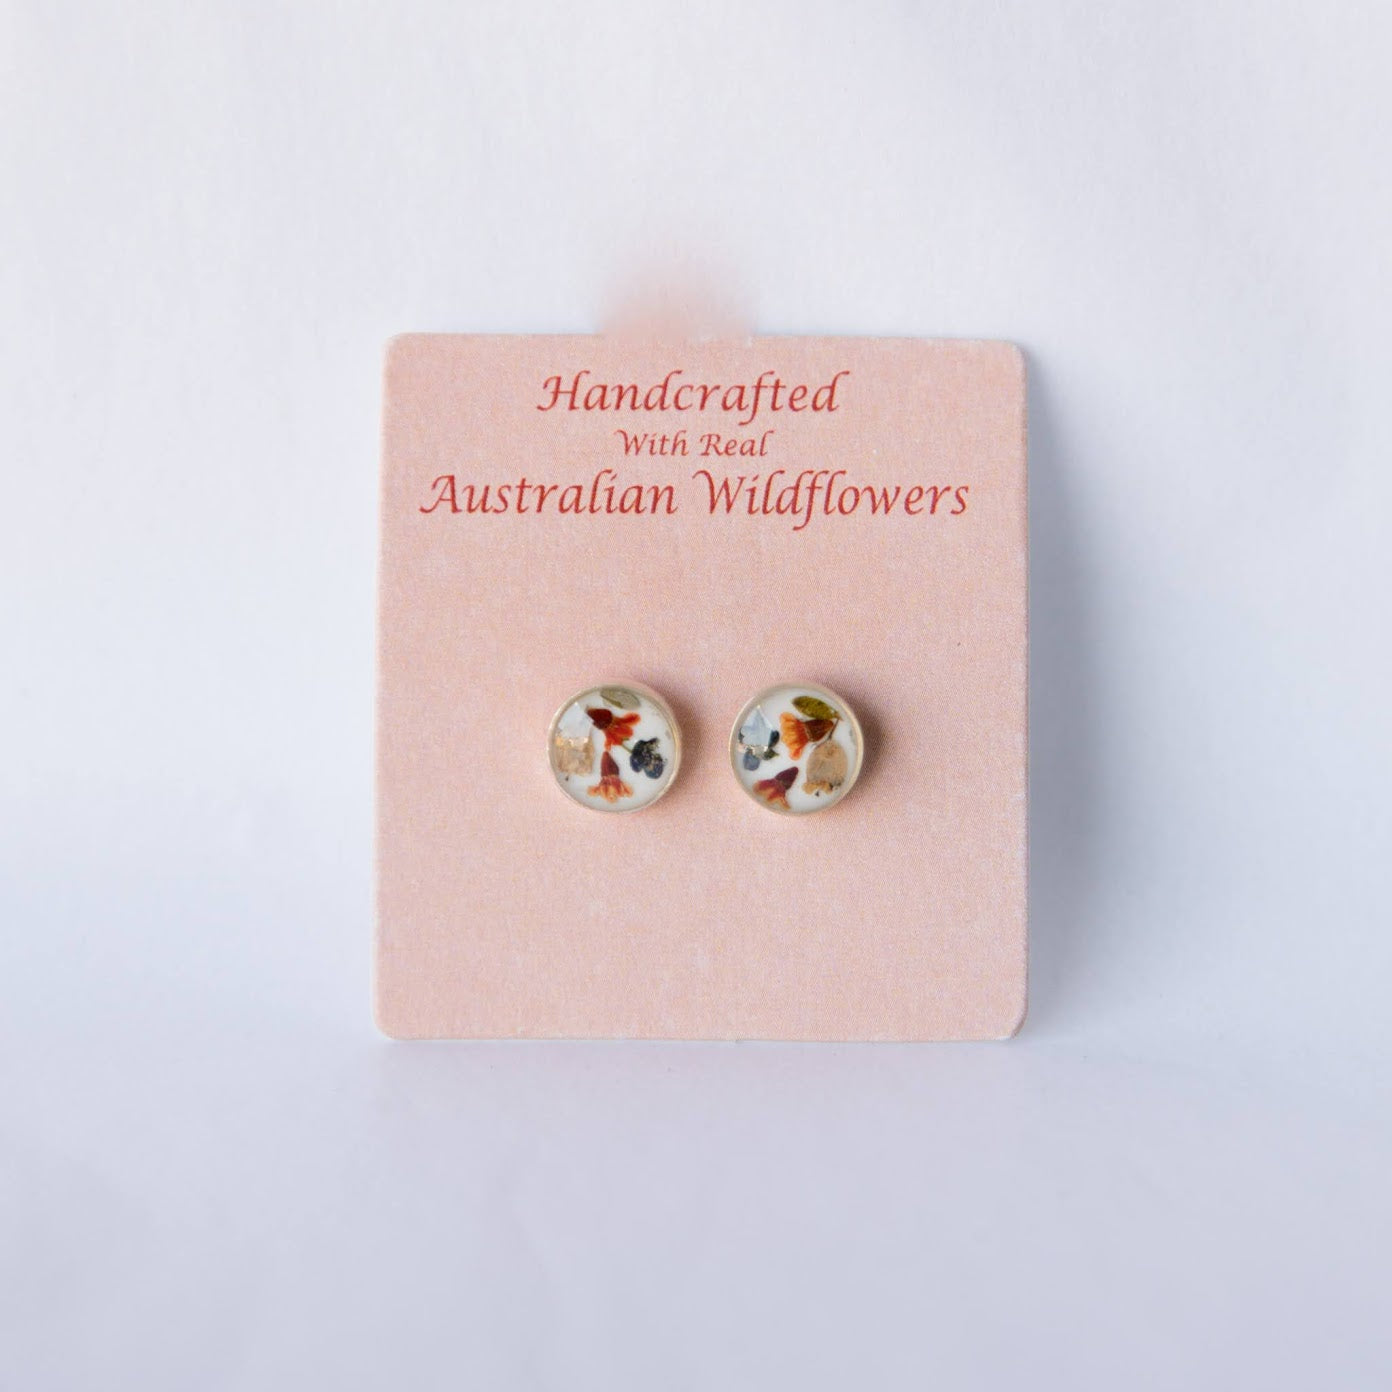 Beija Flor Round White Wildflower Stud Earrings with Real Australian Blossoms